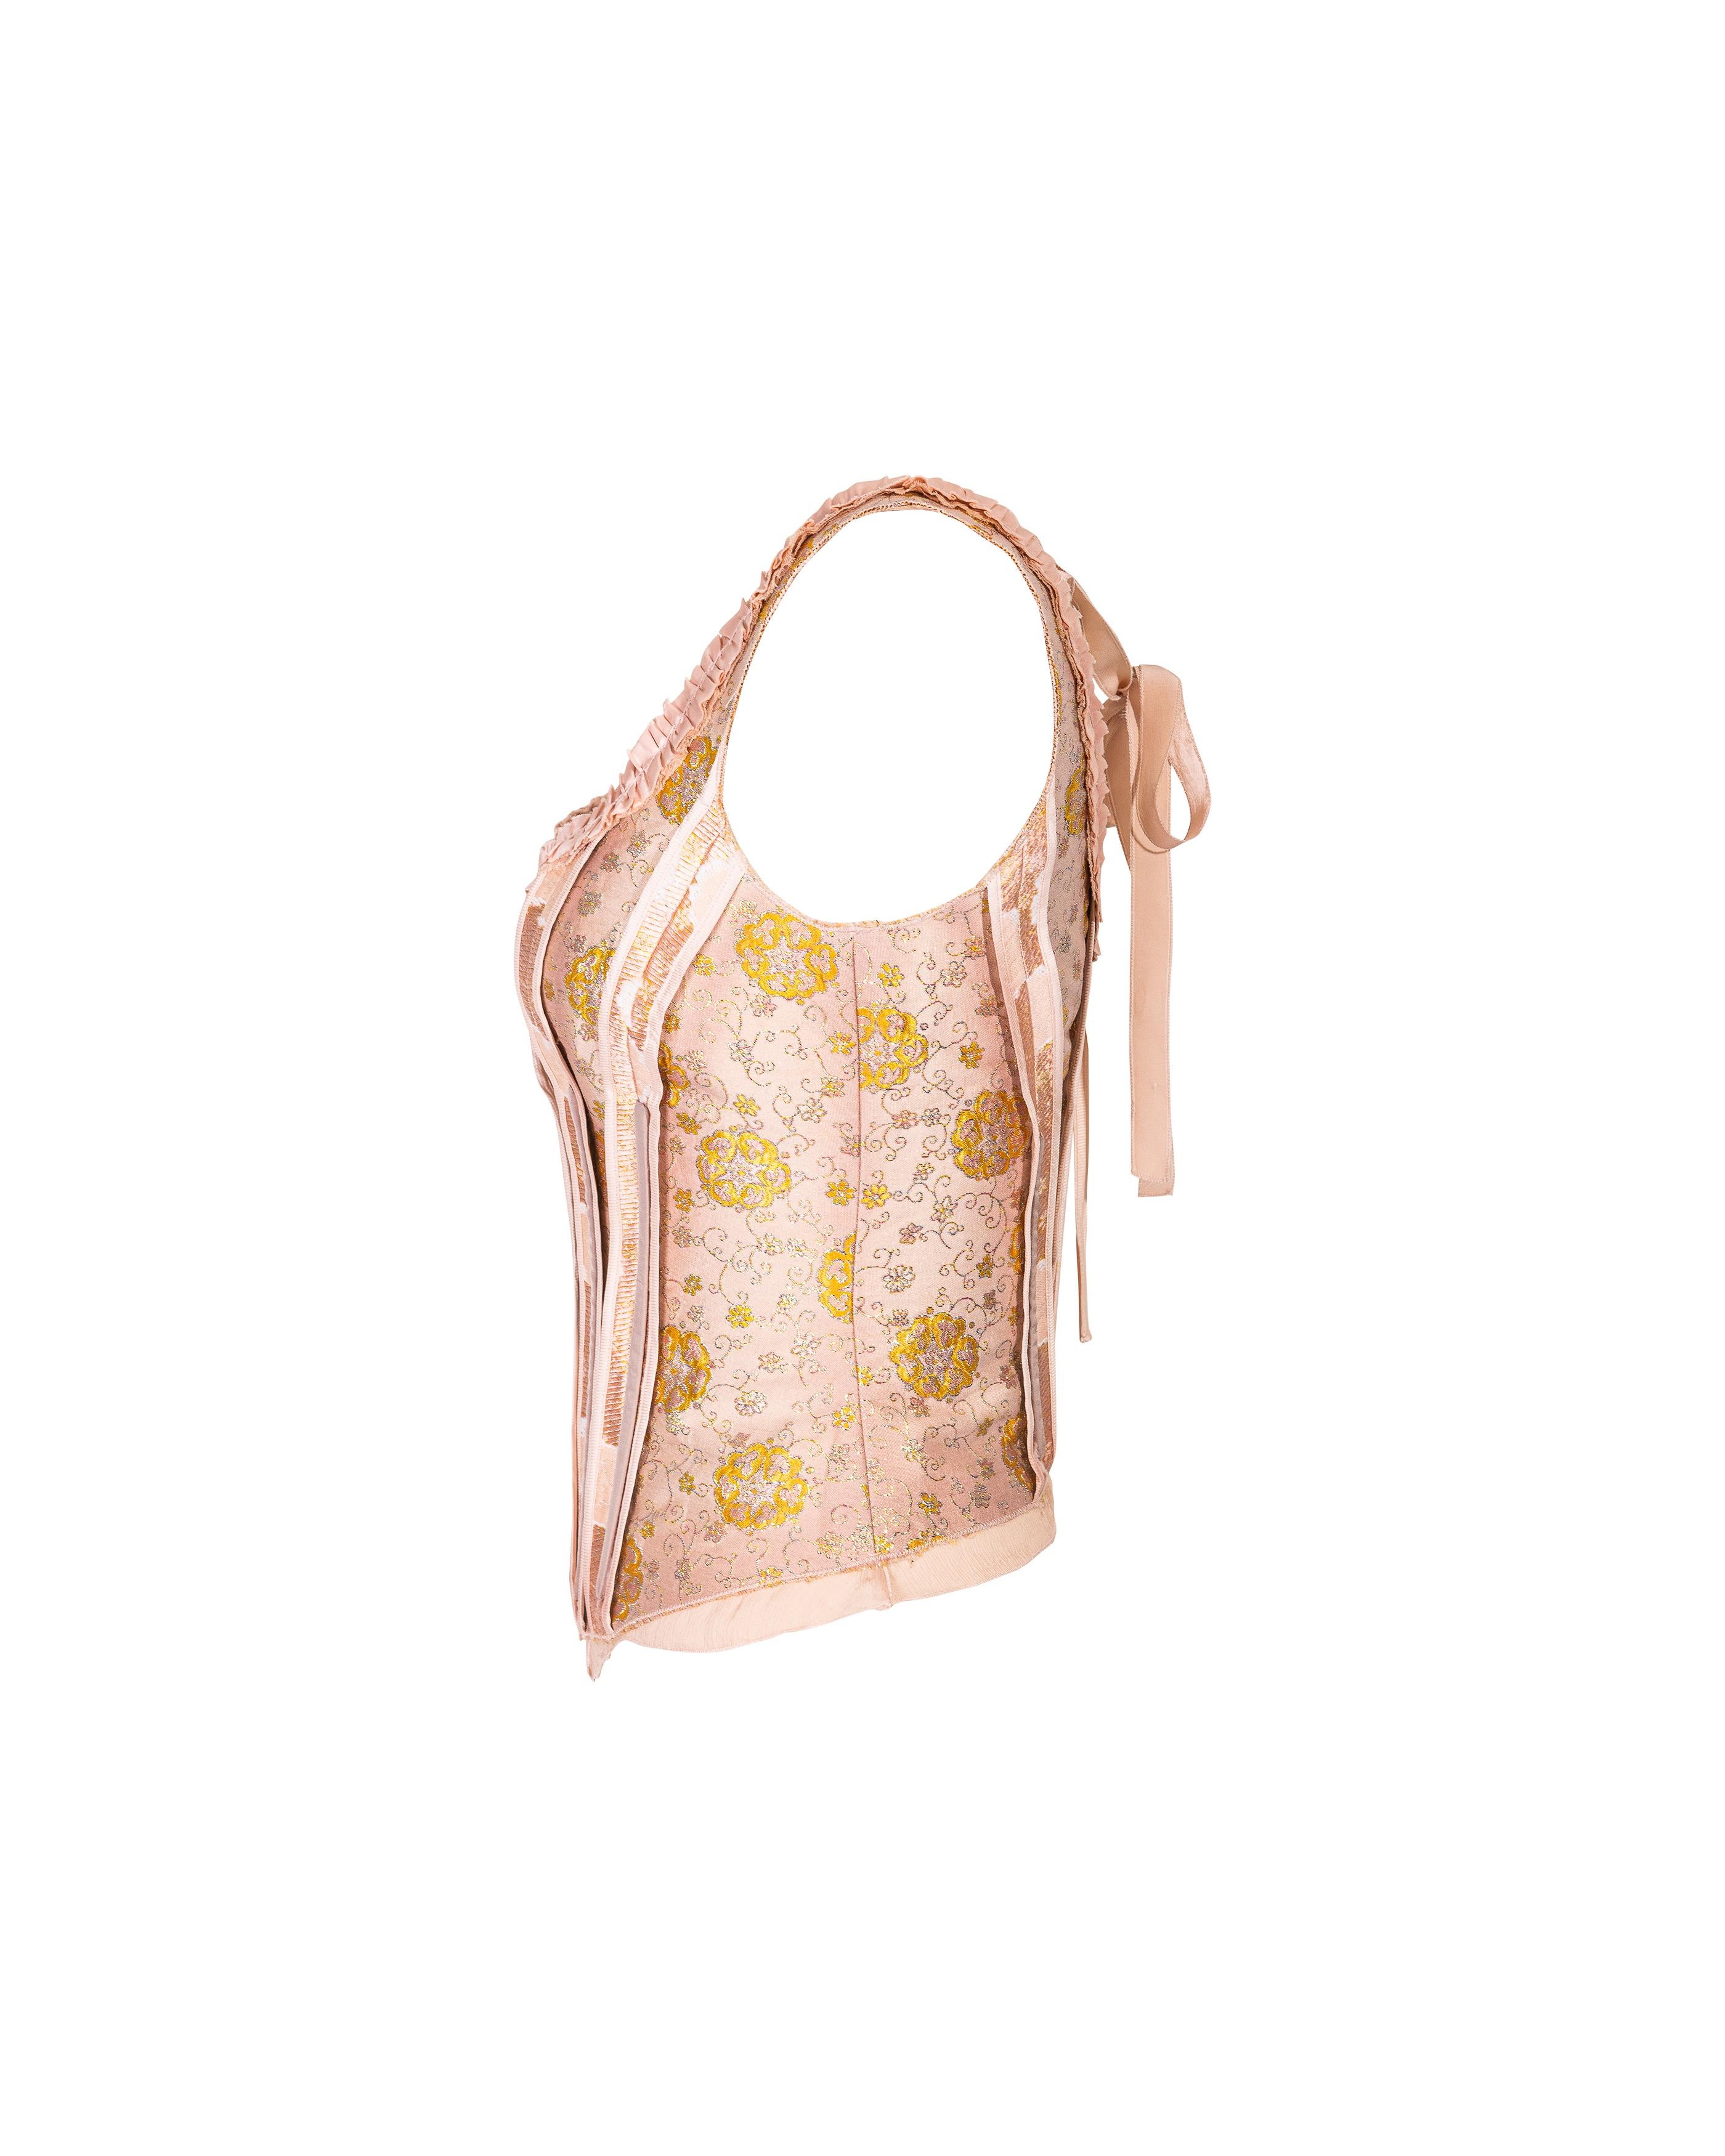 S/S 2003 Prada Blush Pink Floral Brocade Corset with Exterior Boning In Excellent Condition In North Hollywood, CA